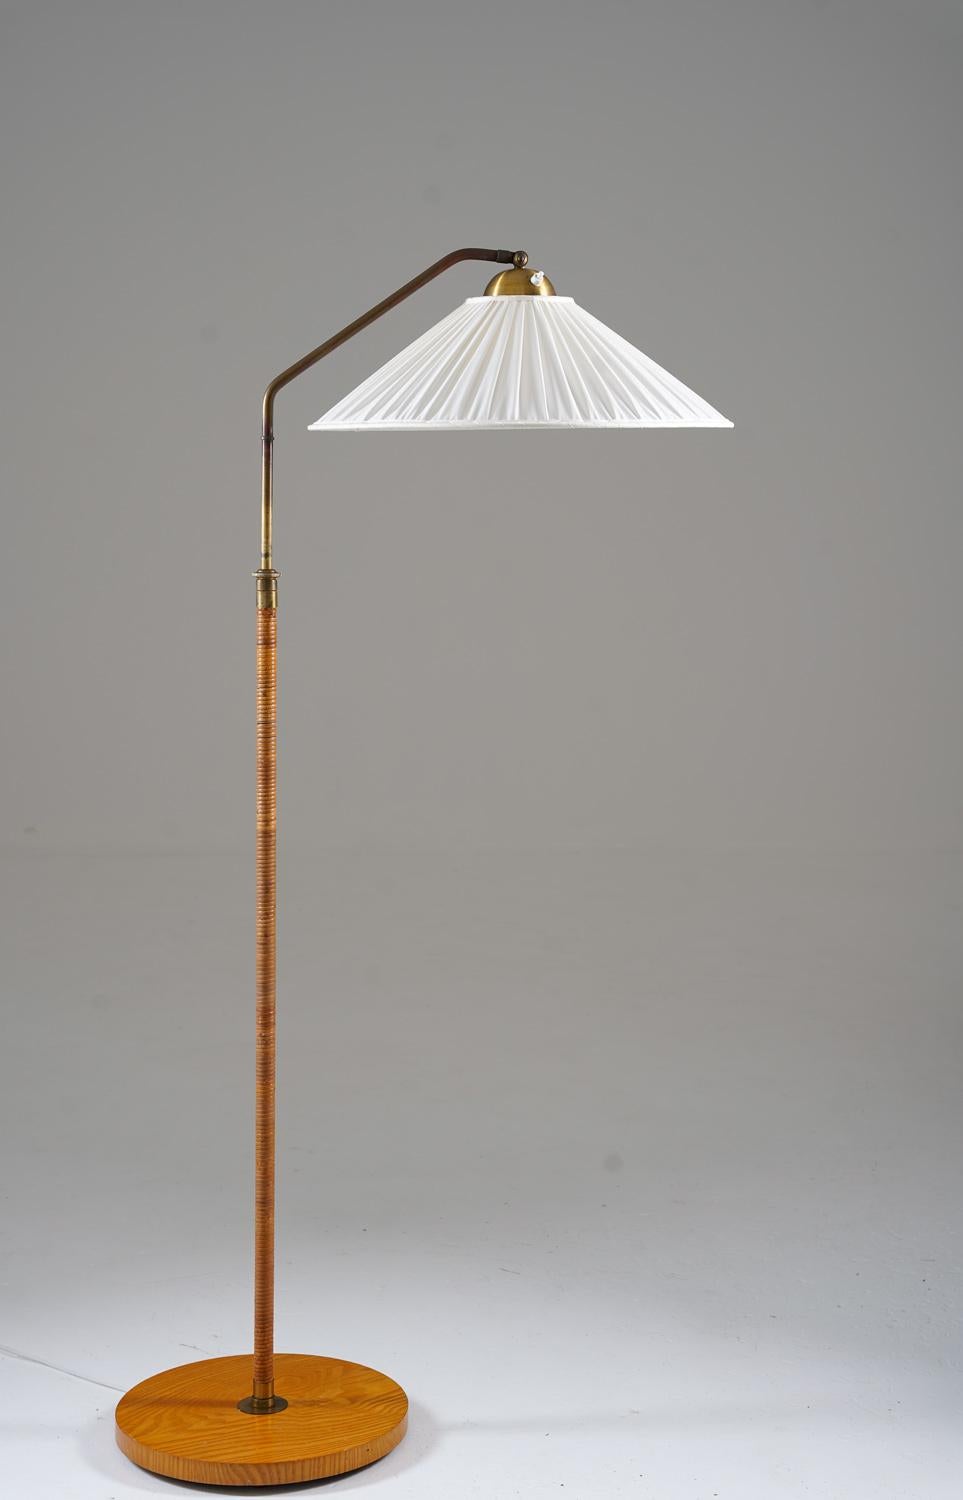 Lovely Swedish modern floor lamp manufactured in Sweden, 1940s. 

The lamp consists of a wooden base, supporting a brass rod with rattan webbing. The shade is fixtured on a swivel arm, which is adjustable in height (130-160cm, 51-63